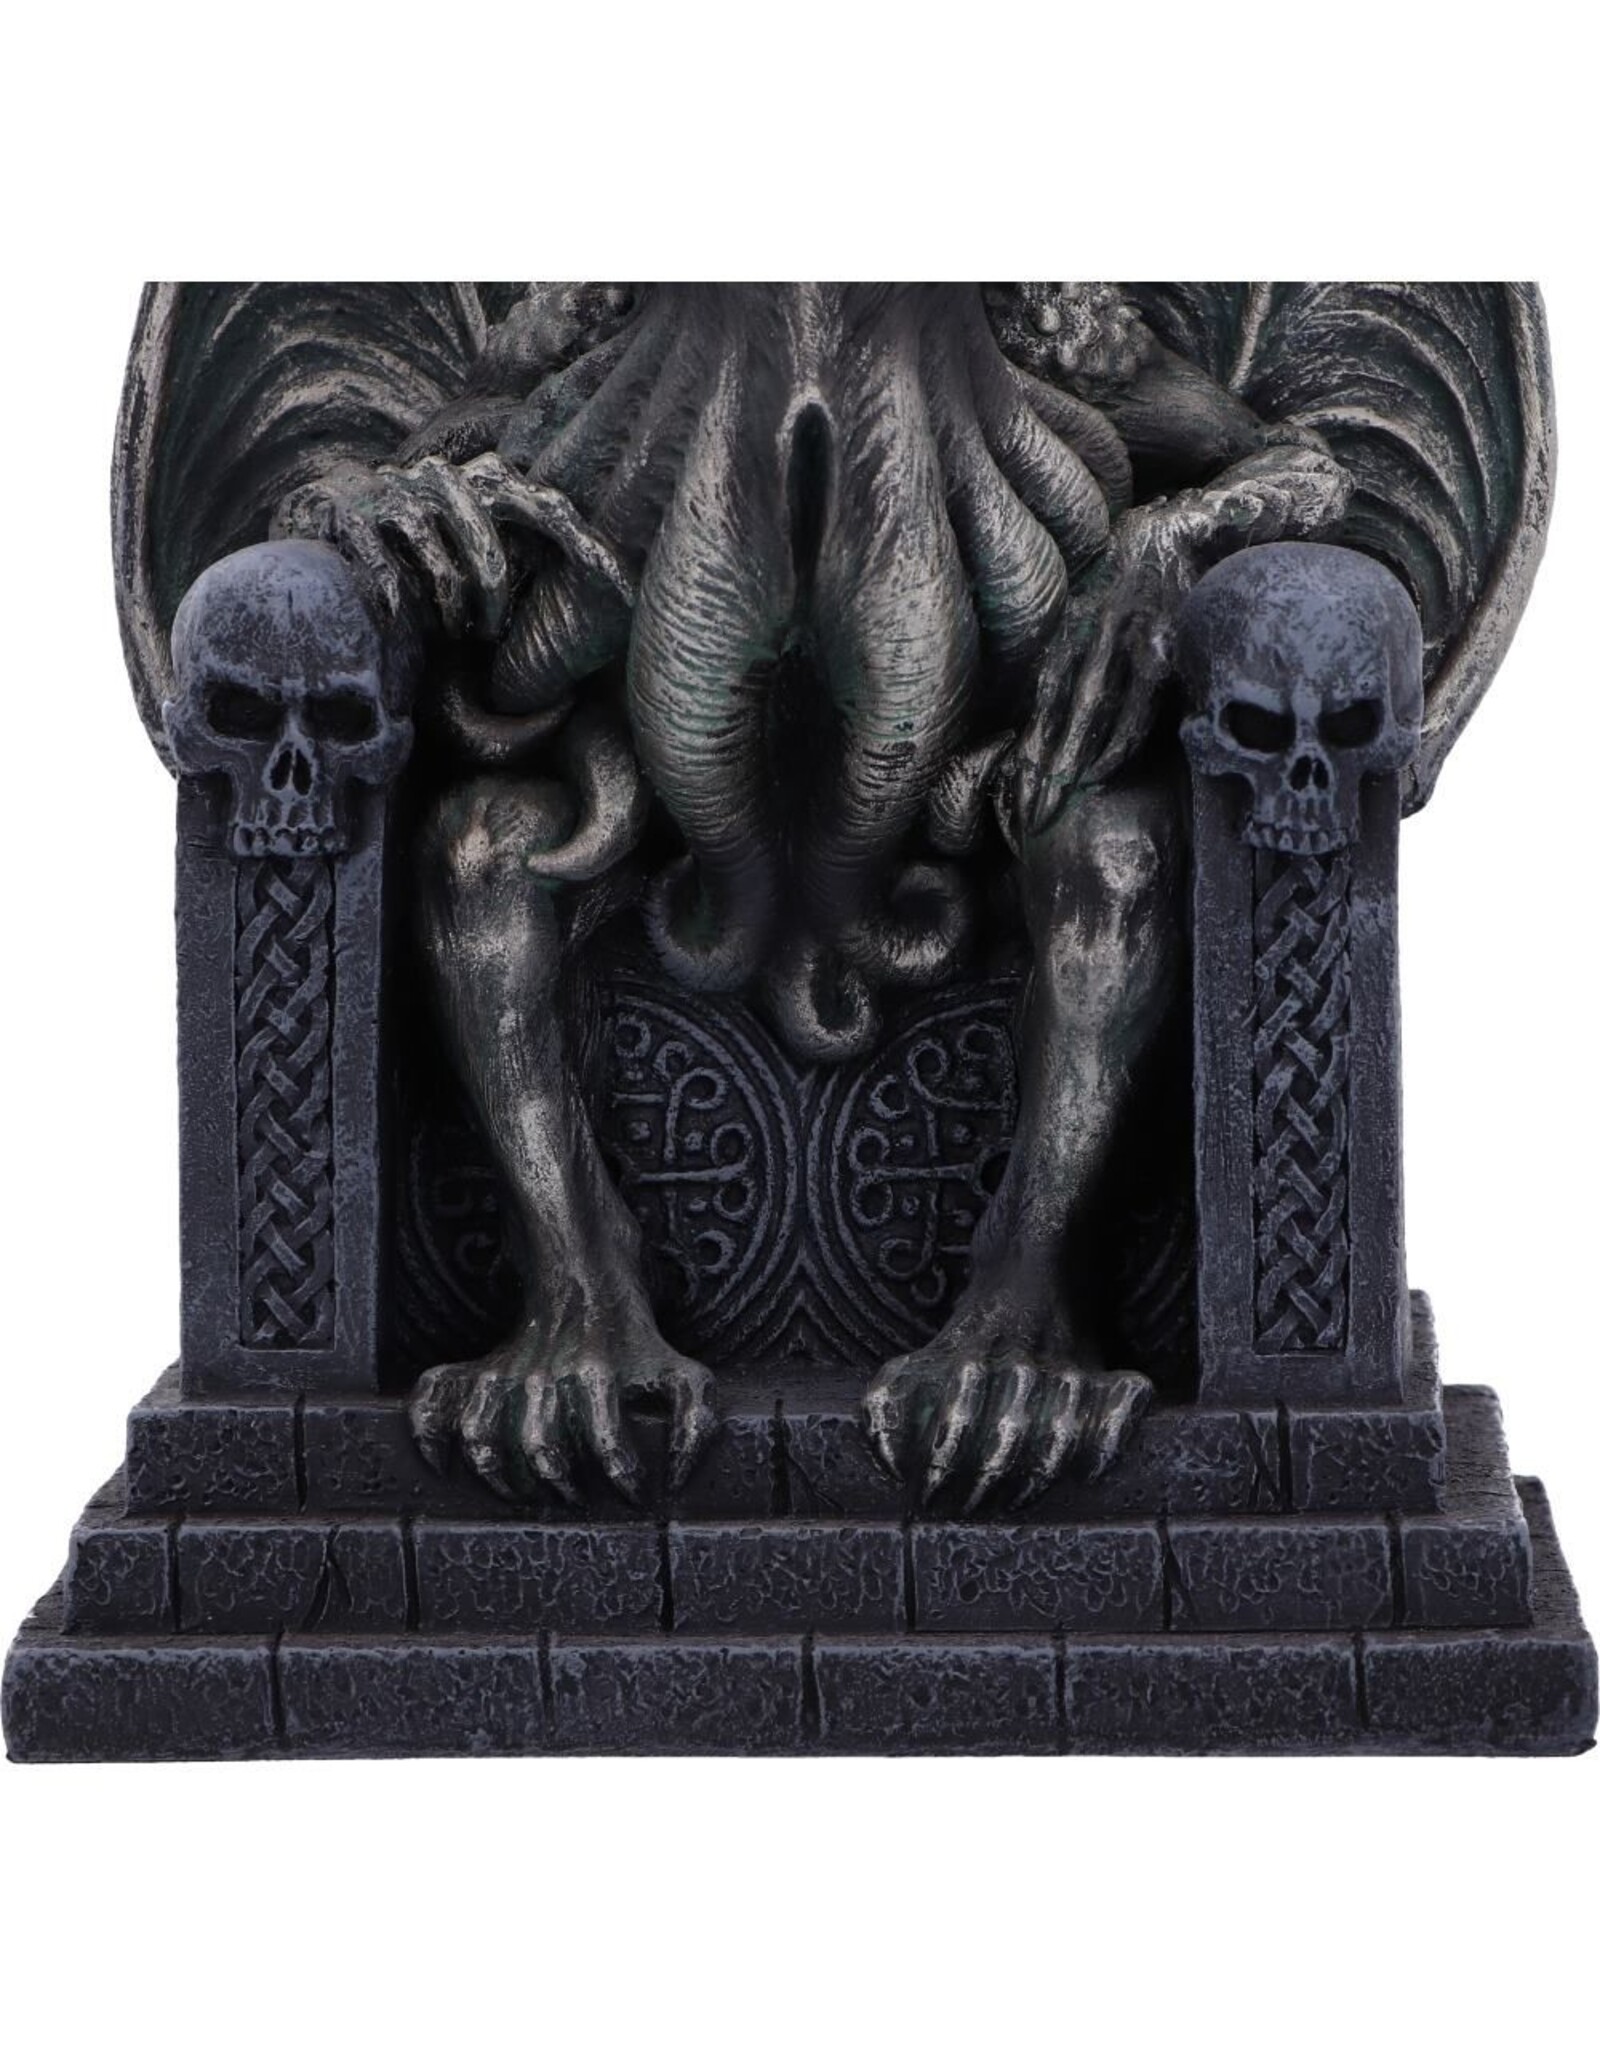 VG Giftware & Lifestyle - Cthulhu's Throne beeldje 20cm